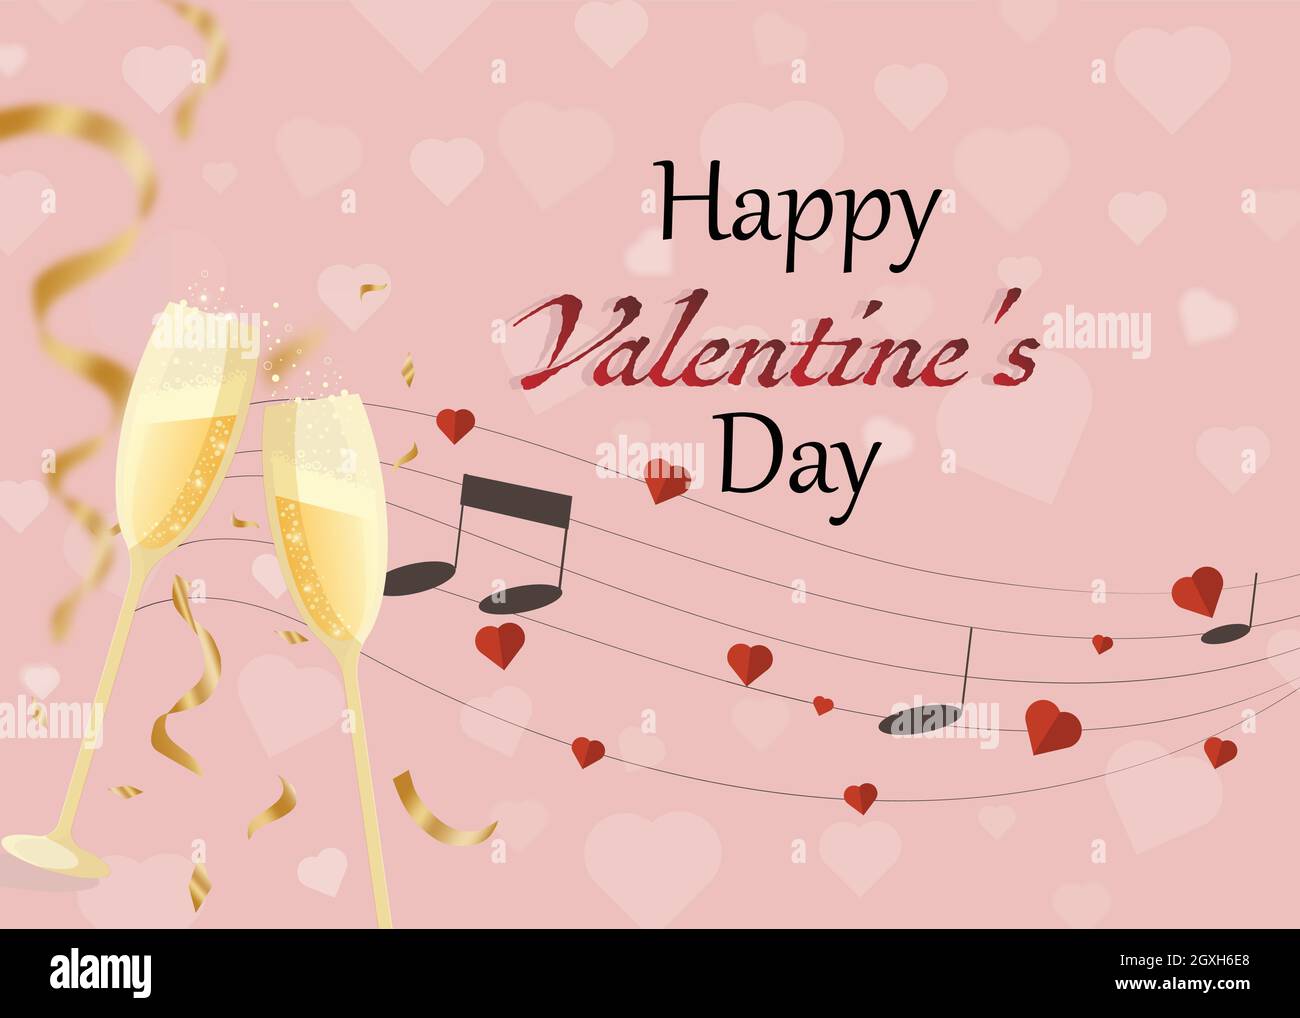 Posters sale discount for valentine's day with Heart, Champagne glass and romantic sheet music notes. Stock Vector